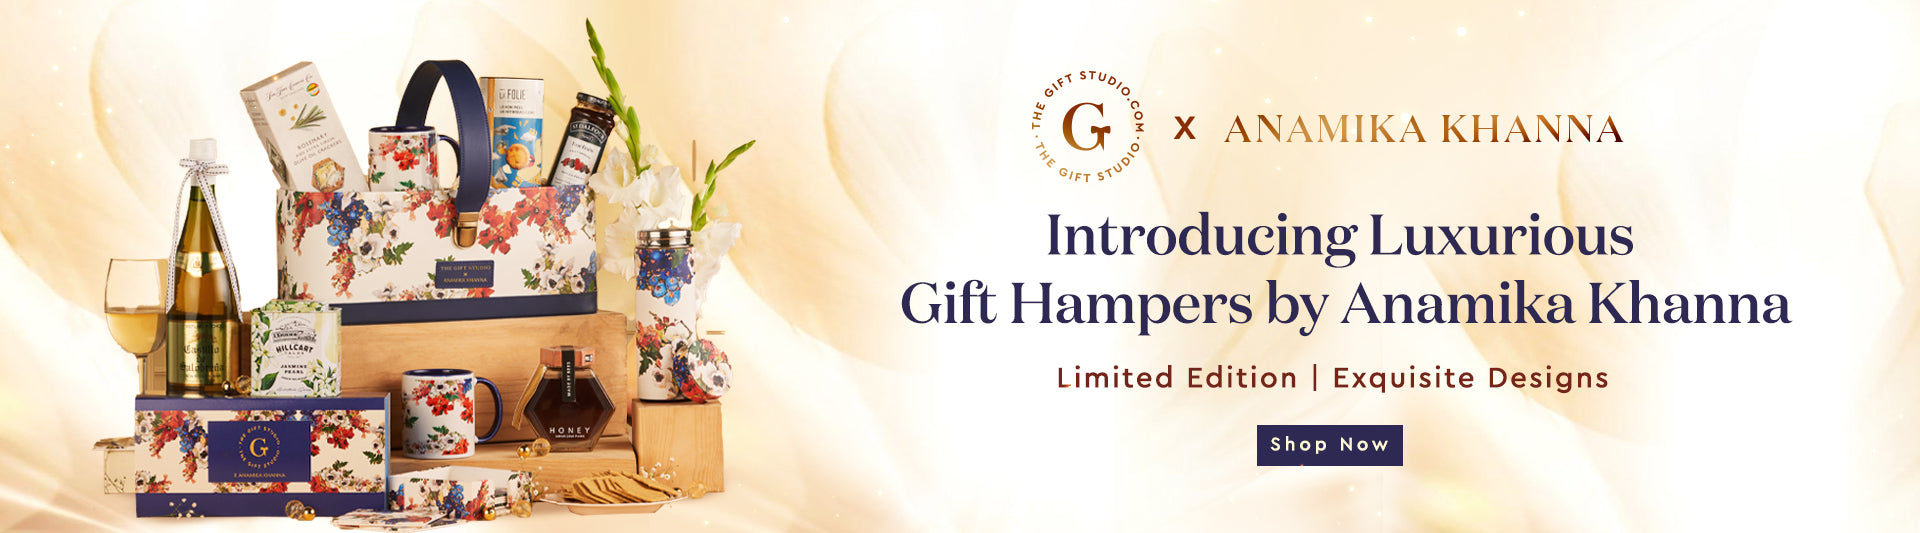 The Gift Studio L'EXCLUSIF Selection Cranberry 80g, Orange Peel 80g, Cocoa  75g & Rose Almond 75g | Dark Chocolate Bar | Diwali & Rakhi Gift Hampers  for Family, Friends & Employee :